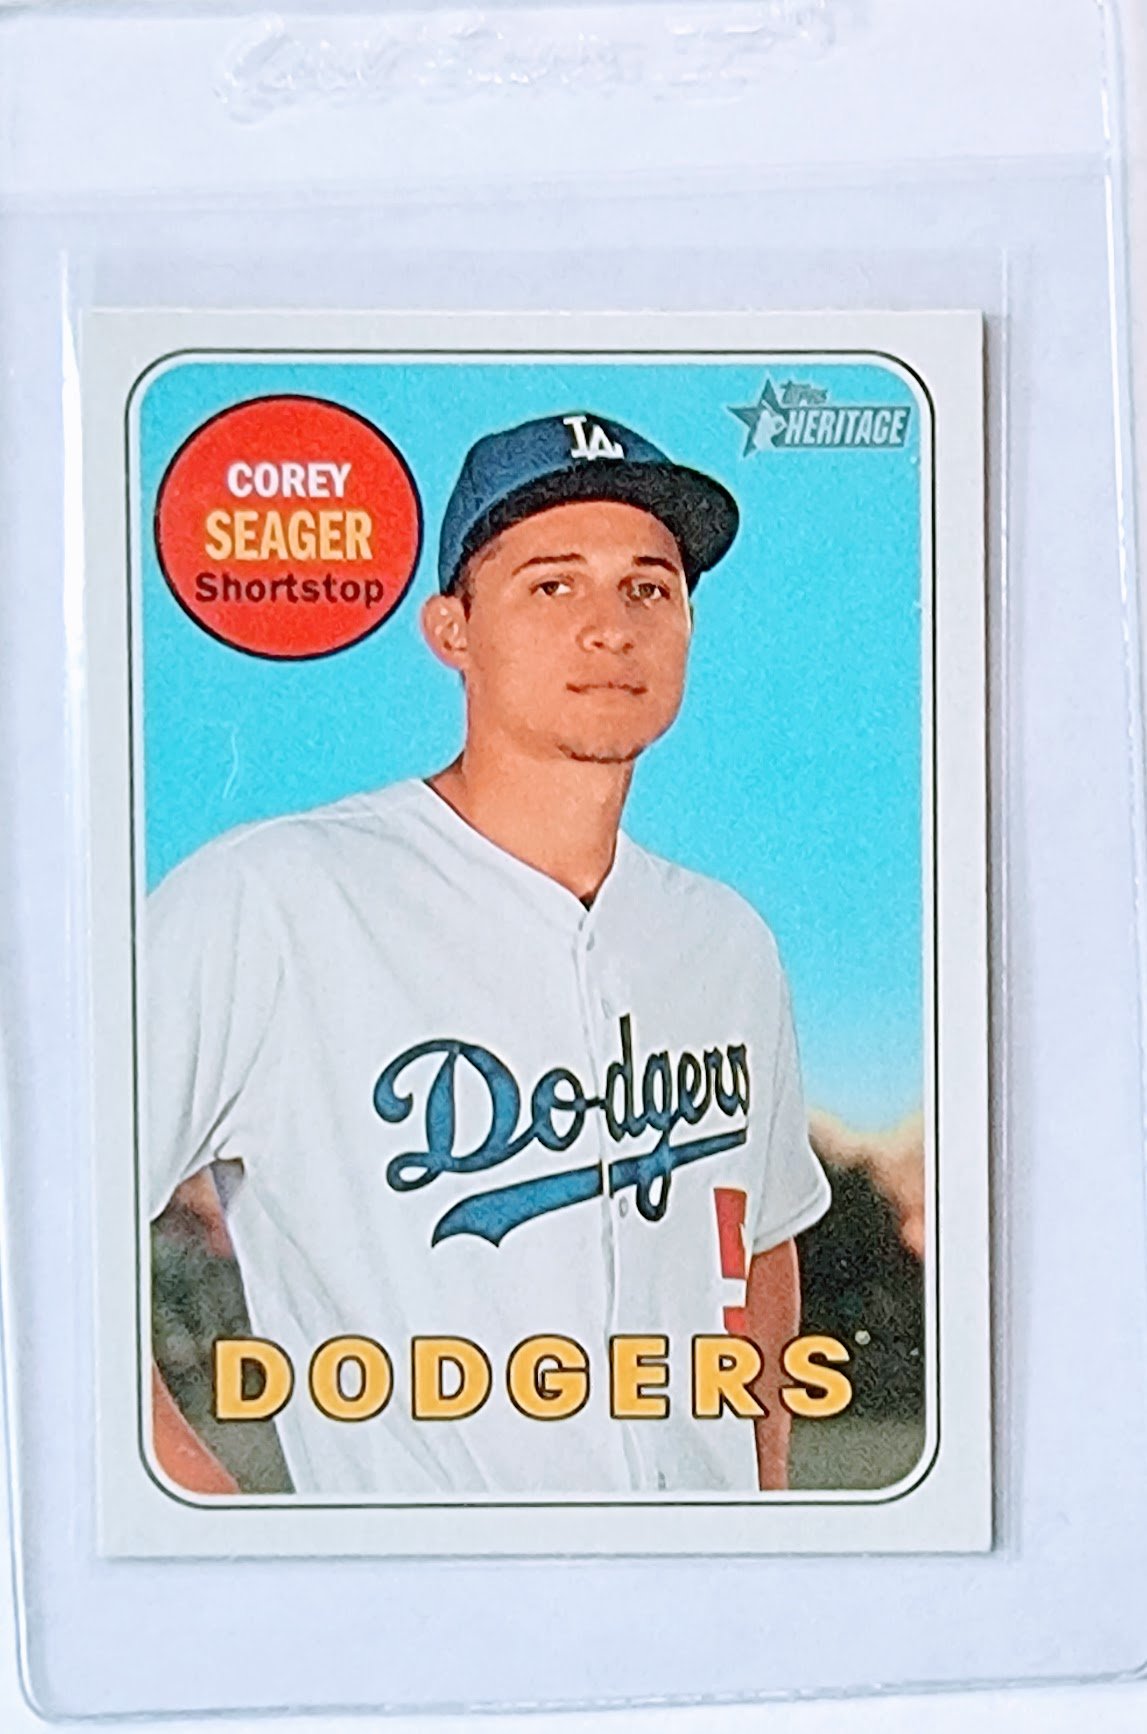 2018 Topps Heritage Corey Seager Baseball Trading Card TPTV simple Xclusive Collectibles   